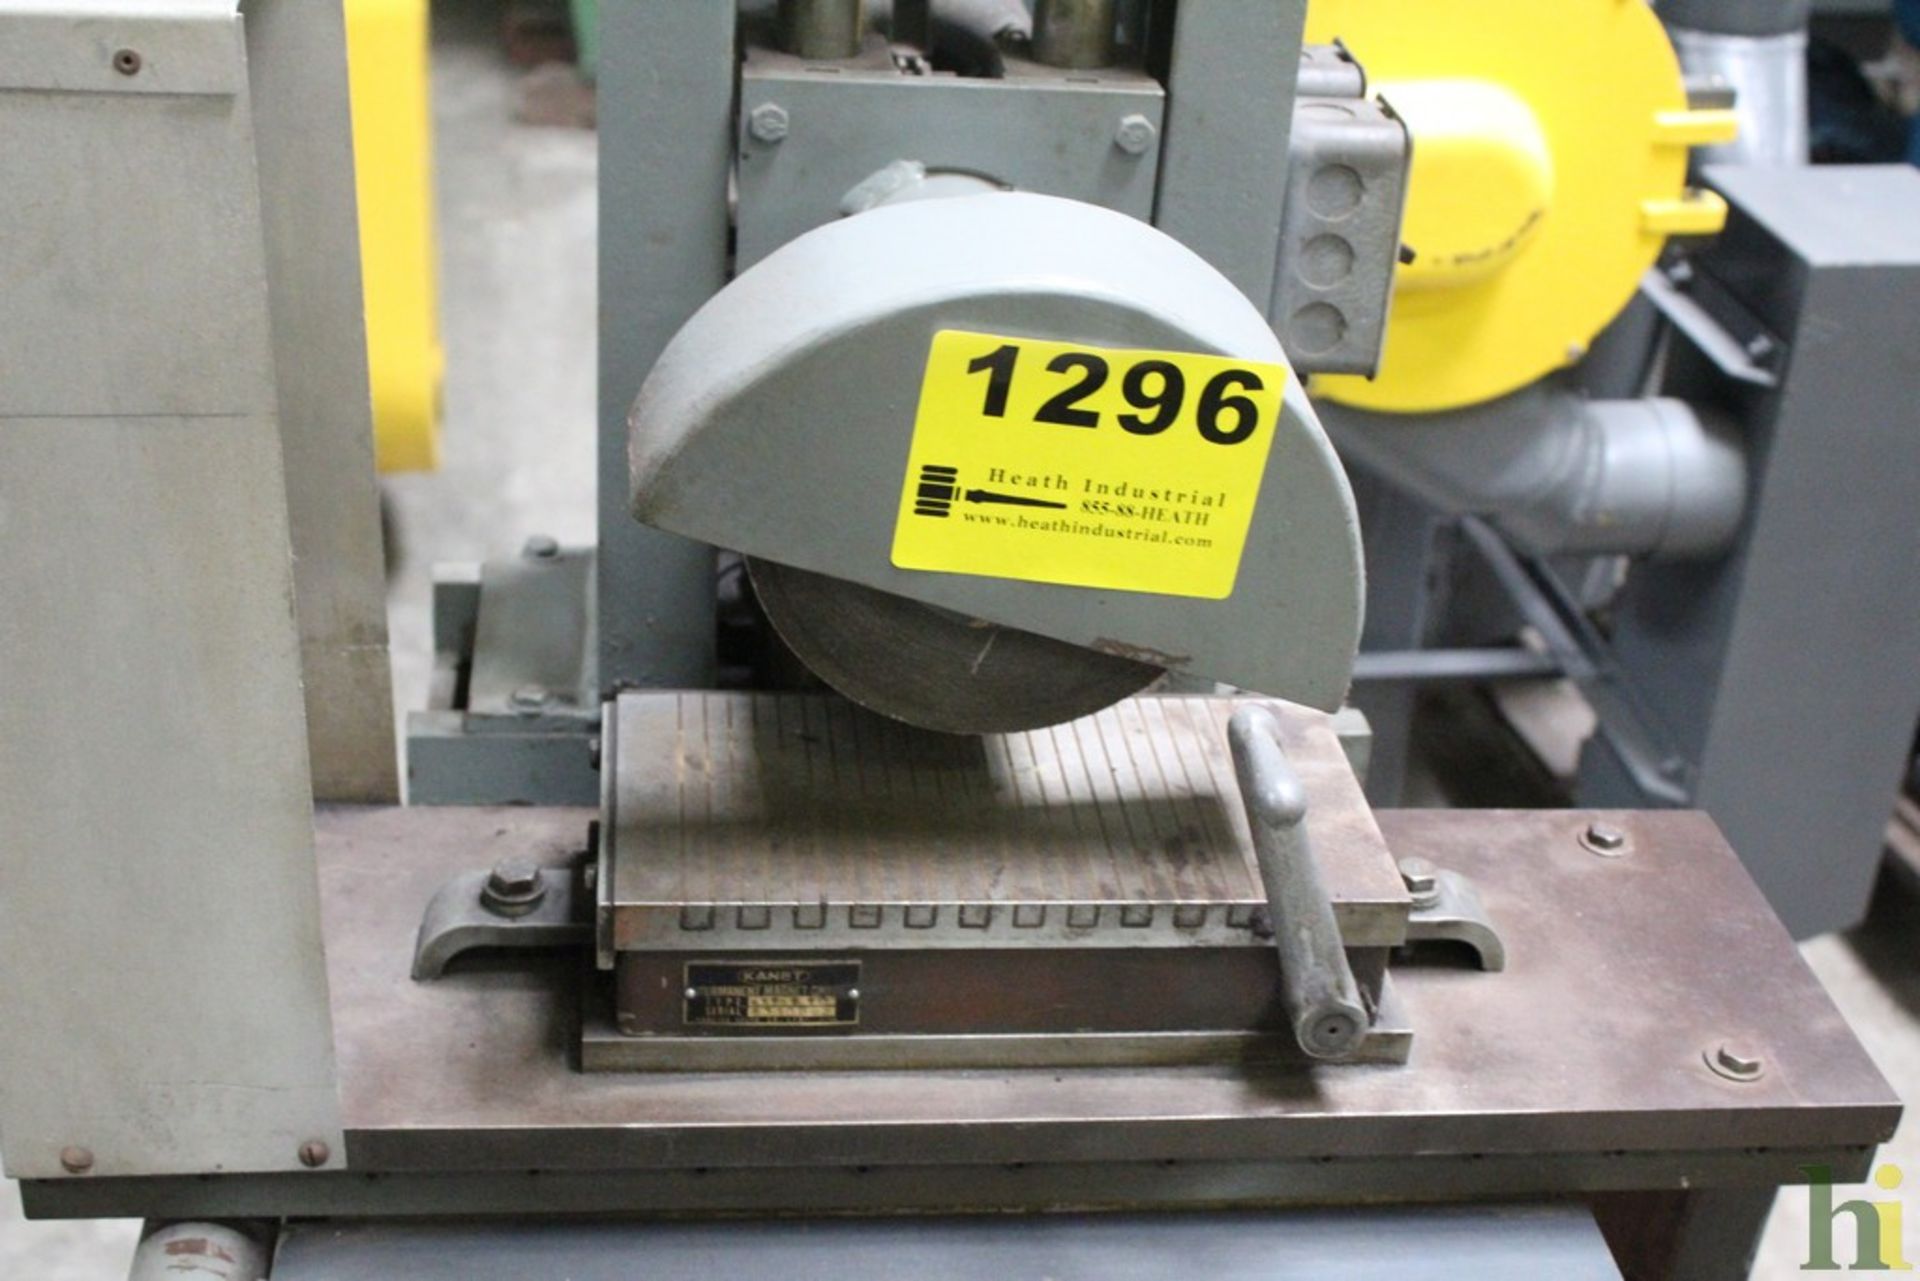 MANUAL SURFACE GRINDER WITH KANET MODEL KM-810 PERMANENT MAGNETIC CHUCK - Image 2 of 3